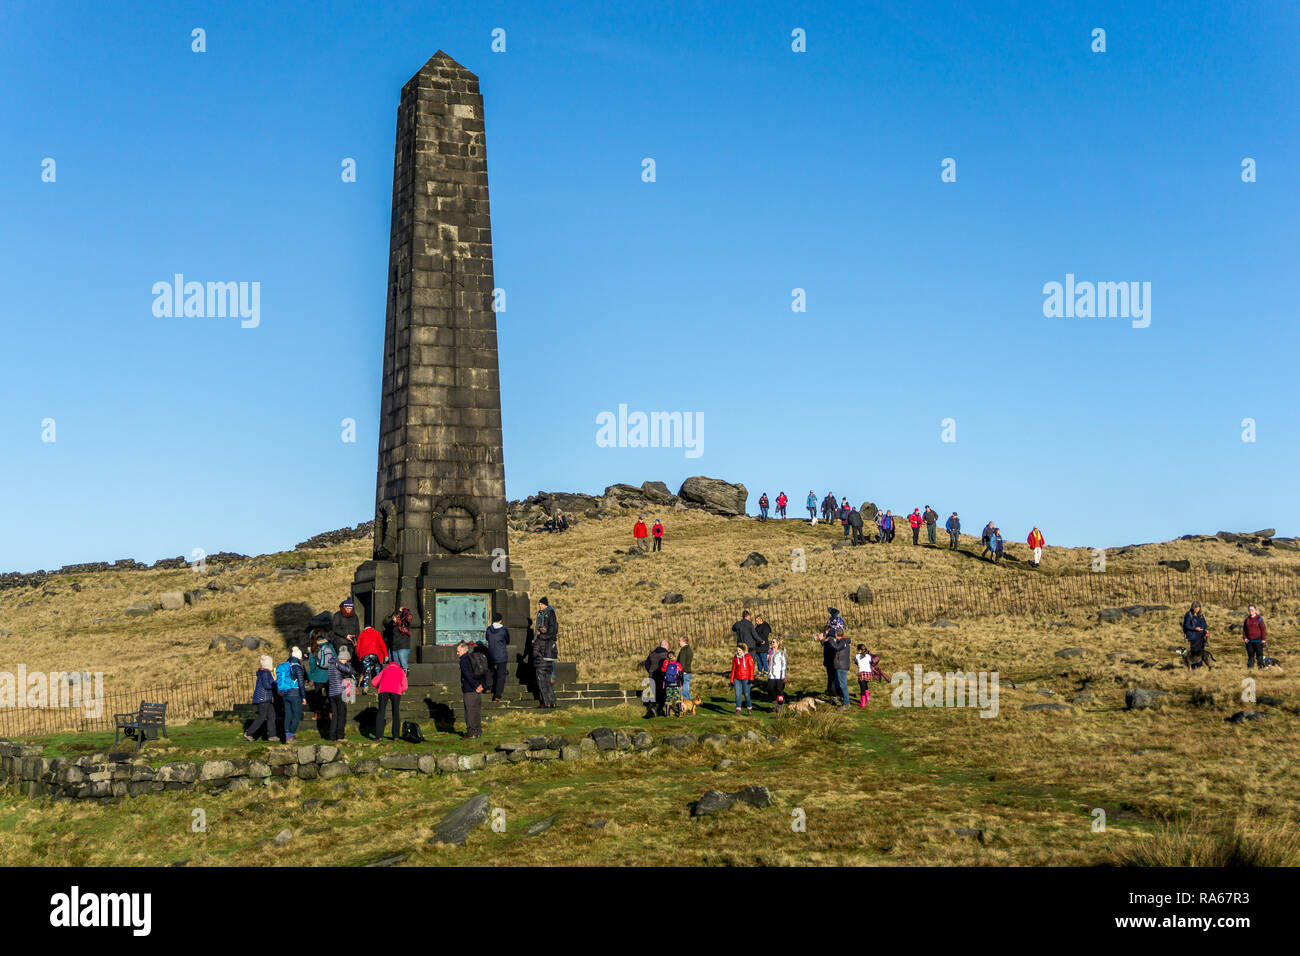 Obelisk War memorial,Aldermans Hill,  Lancashire, UK. 1st January, 2019. A warm sunny New Years Day prompts many walkers and ramblers to climb to the top of Aldermans Hill, Saddleworth moor, to visit the Obelisk War memorial. 1st January 2019. Carl Dickinson/Alamy Live news Stock Photo